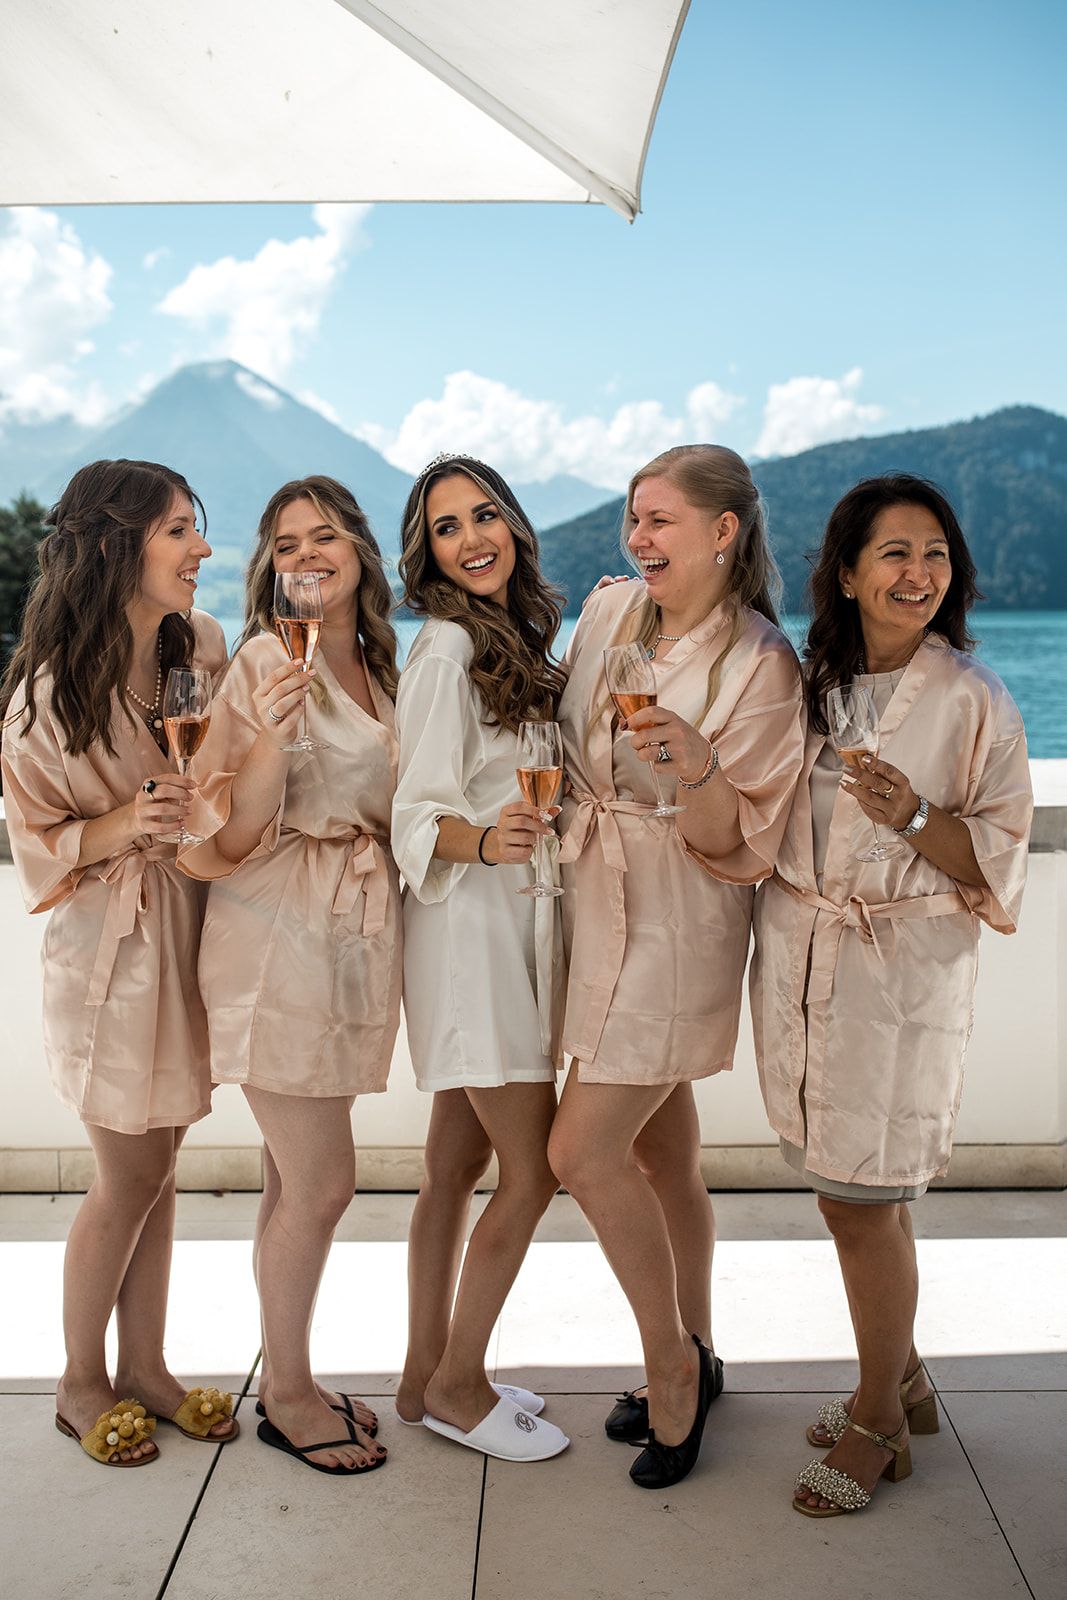 Bride and bridesmaids on a balcony sharing aperitif before Lake Lucerne wedding ceremony